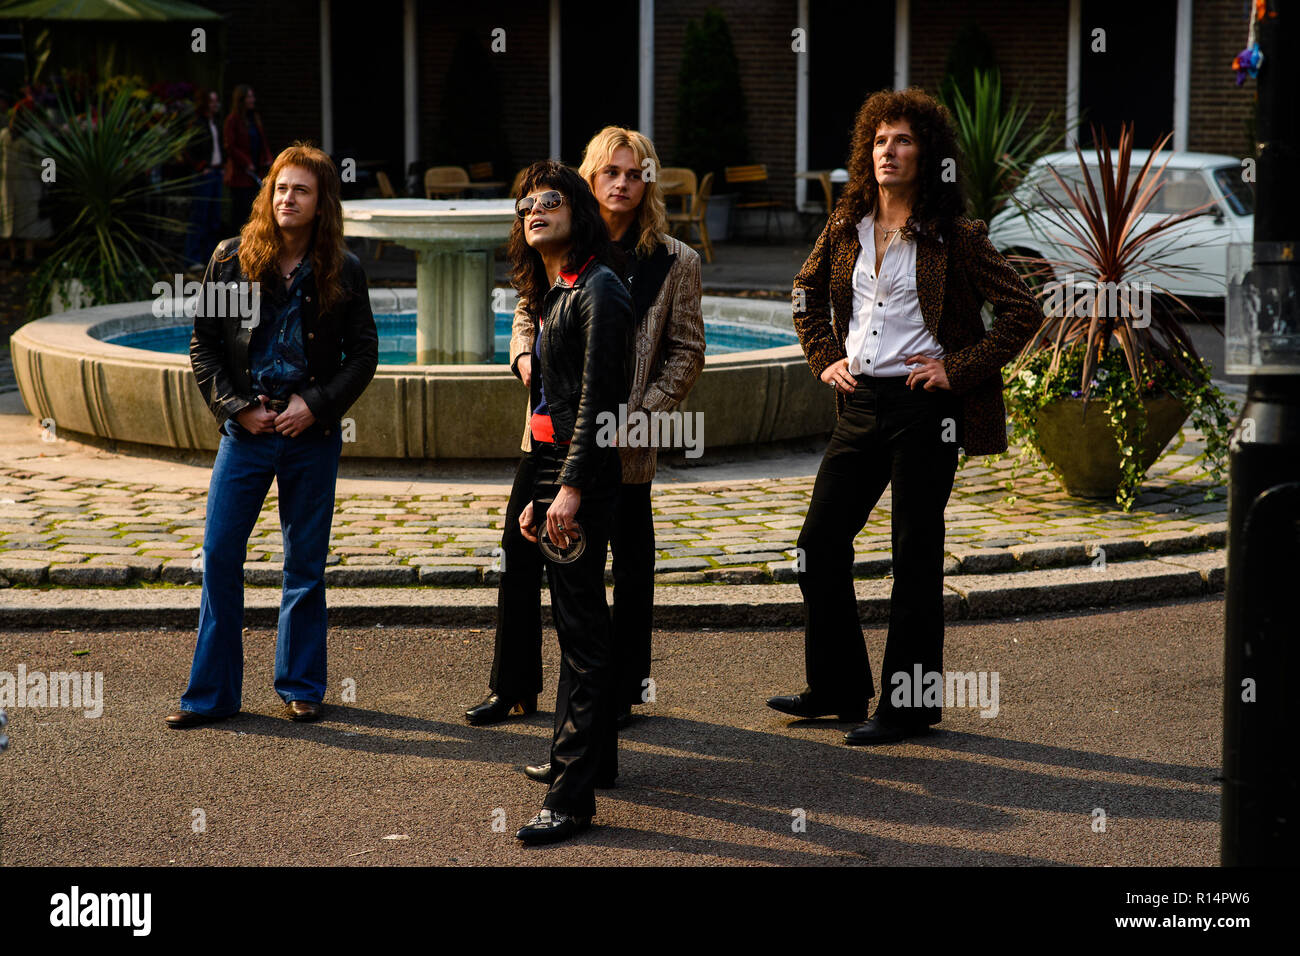 RELEASE DATE: November 2, 2018 TITLE: Bohemian Rhapsody STUDIO: Twentieth Century Fox DIRECTOR: Bryan Singer PLOT: The cast and producer of Bohemian Rhapsody share what it was like bringing the story of Freddie Mercury and Queen to the big screen. STARRING: L-R: JOE MAZZELLO as John Deacon, RAMI MALEK as Freddie Mercury, BEN HARDY as Roger Taylor and GWILYM LEE as Brian May. (Credit Image: © Twentieth Century Fox/Entertainment Pictures) Stock Photo